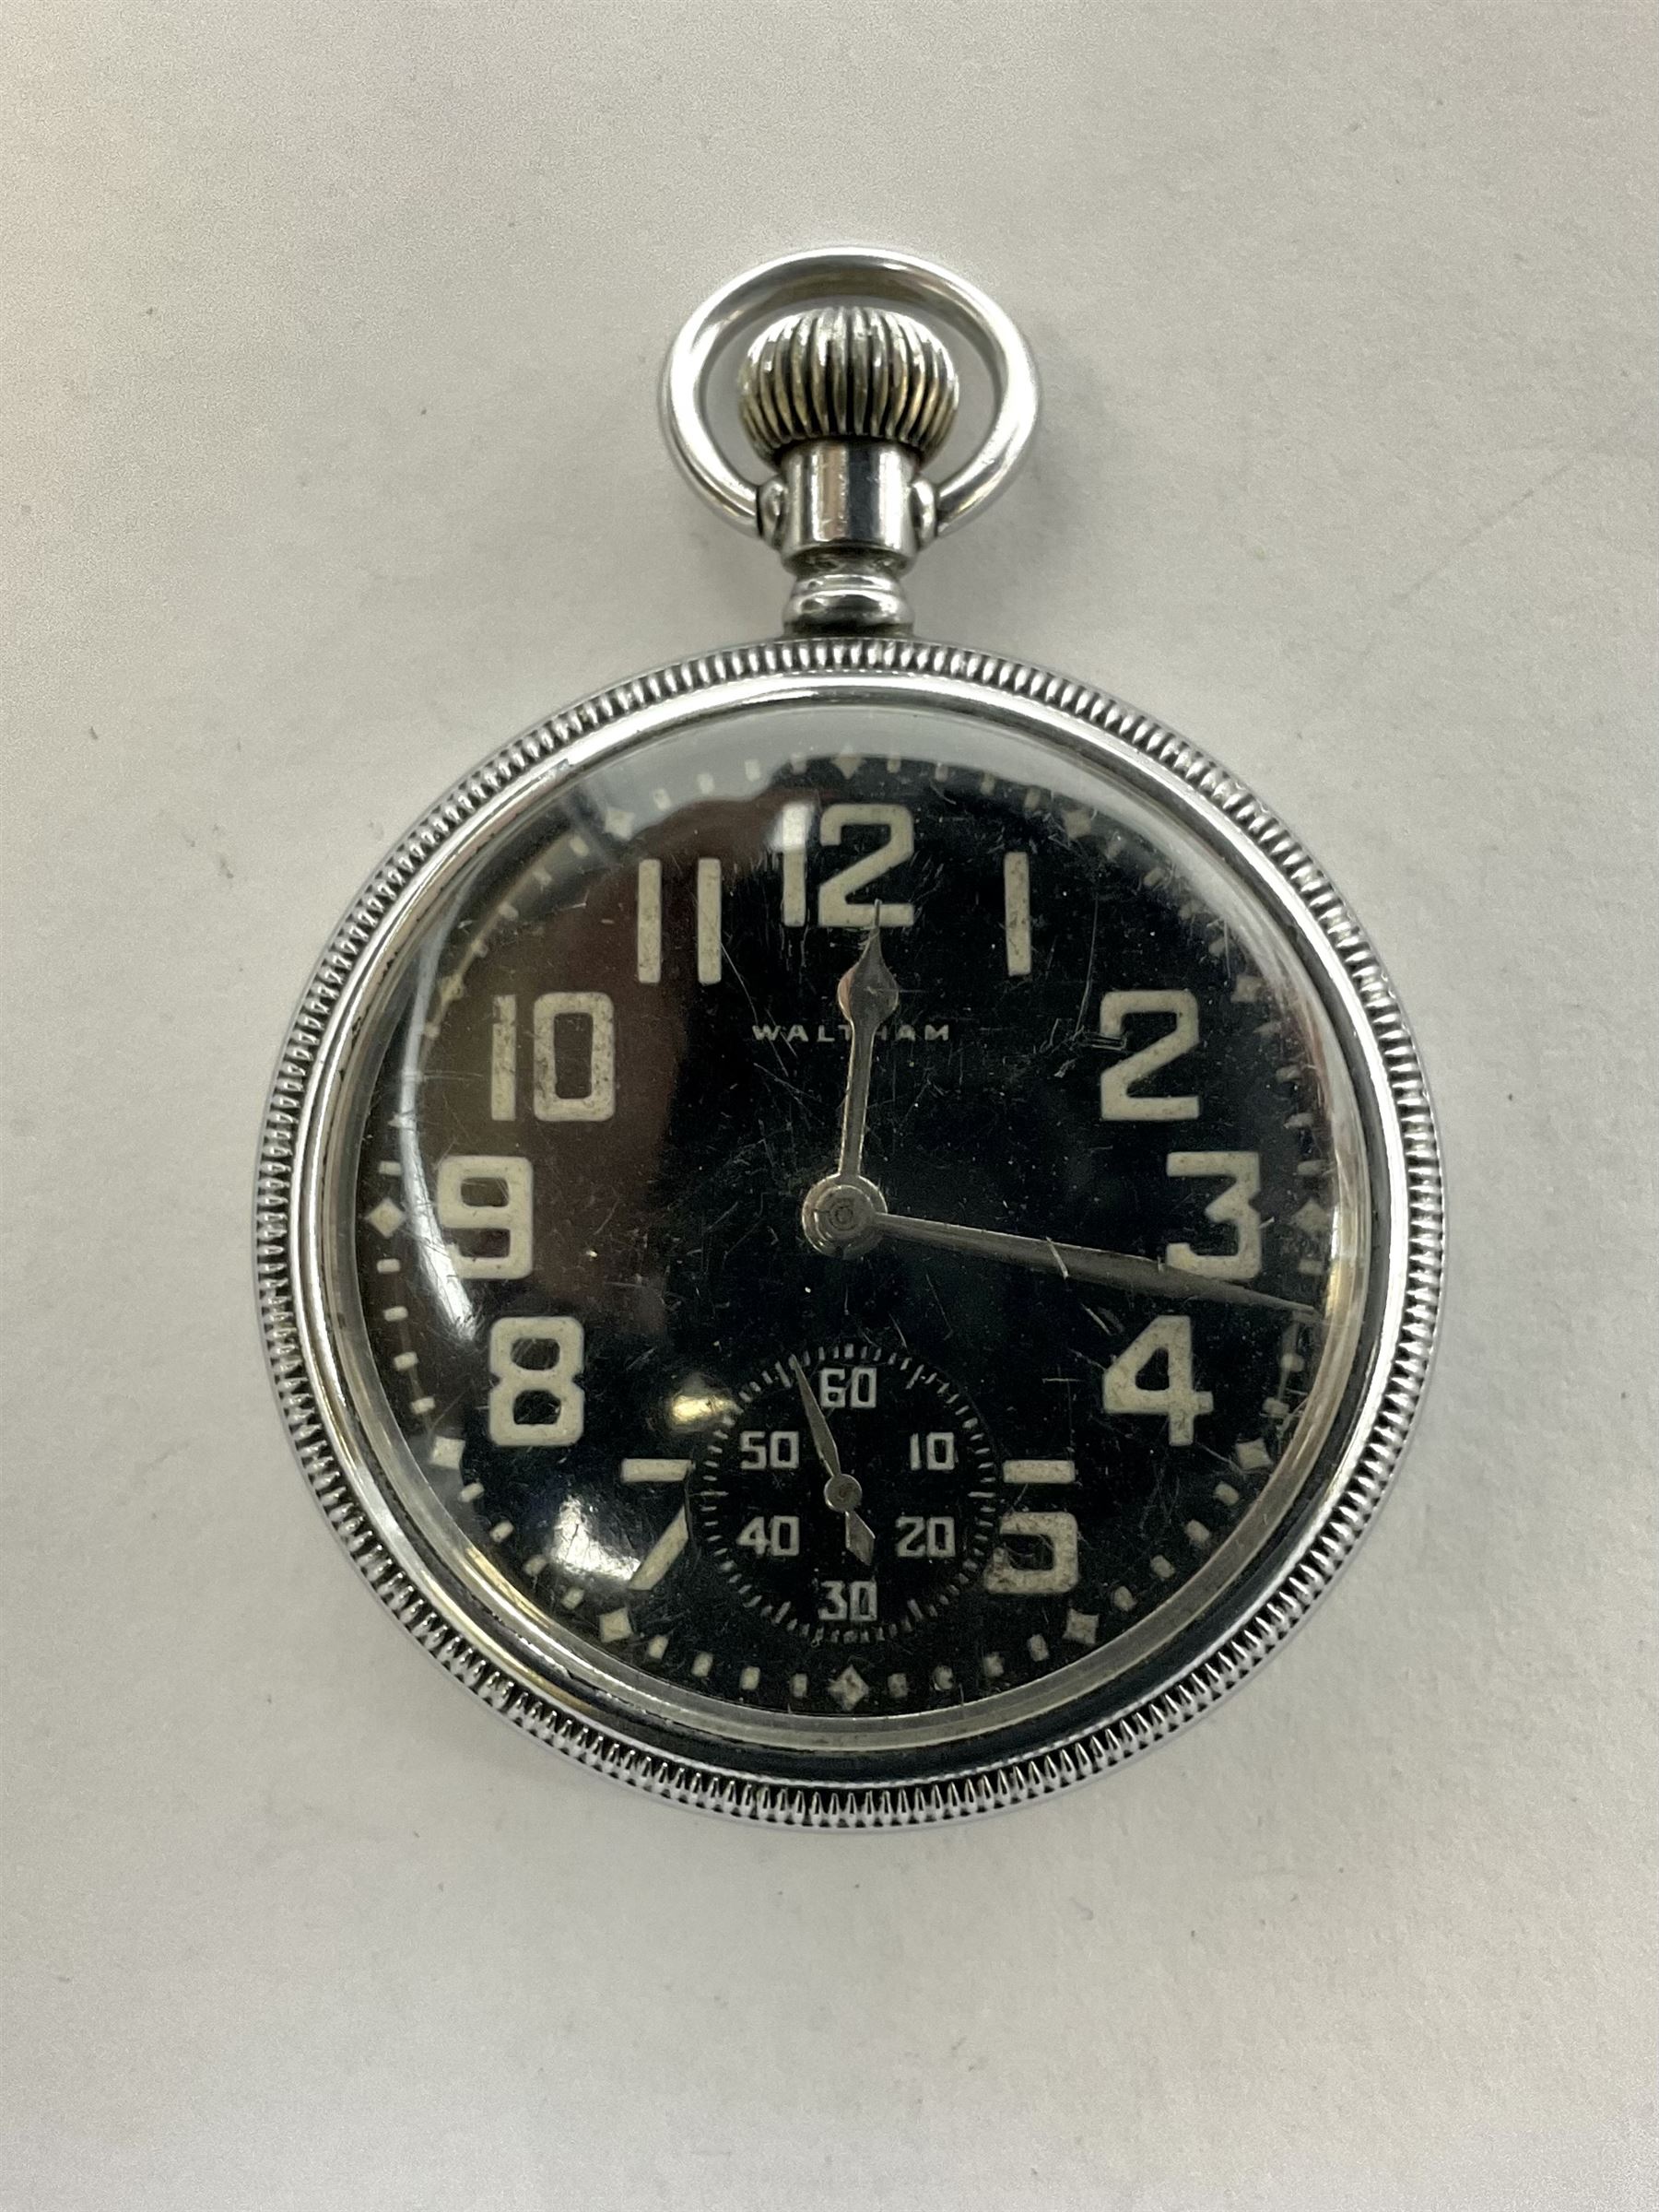 Waltham military open face pocket watch - Image 2 of 3